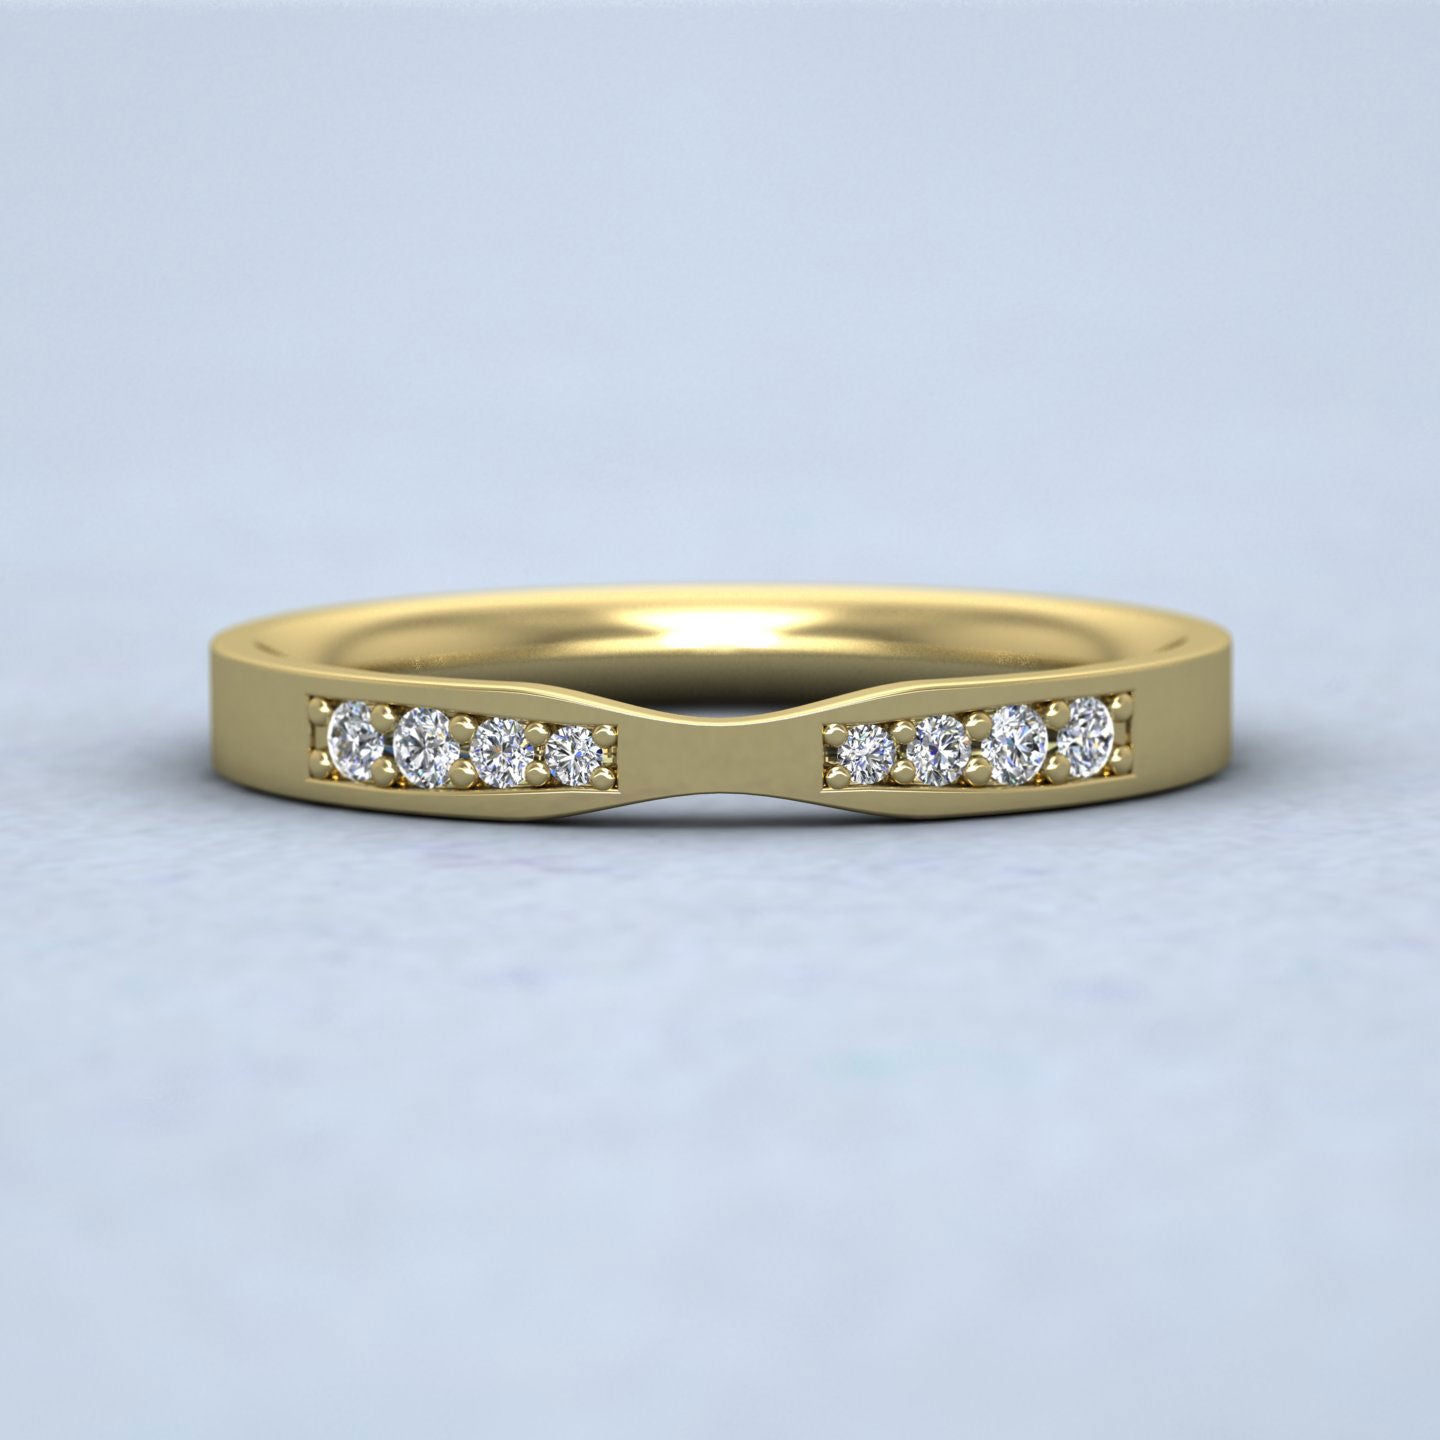 Pinch Shaped Wedding Ring In 18ct Yellow Gold 2.5mm Wide